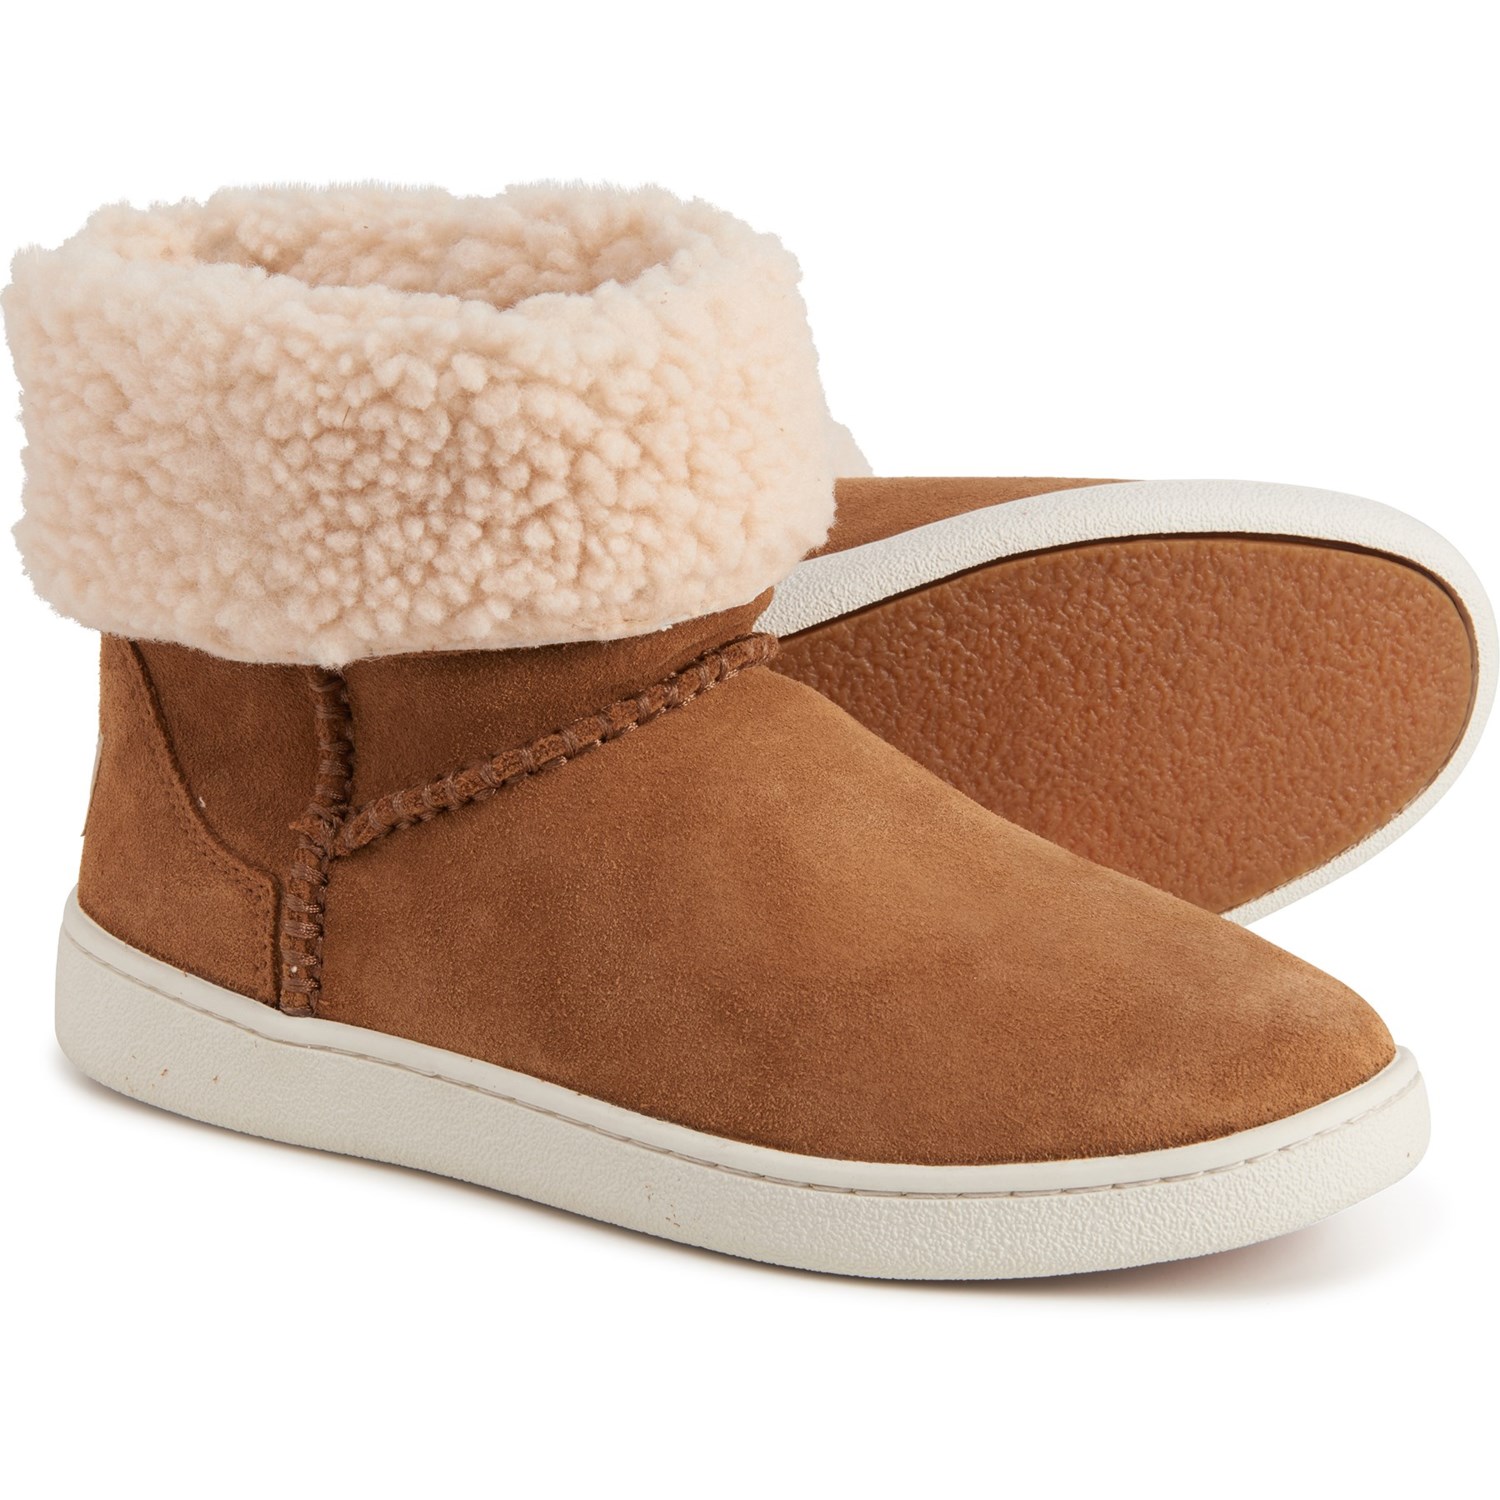 ugg mika classic sneaker boots